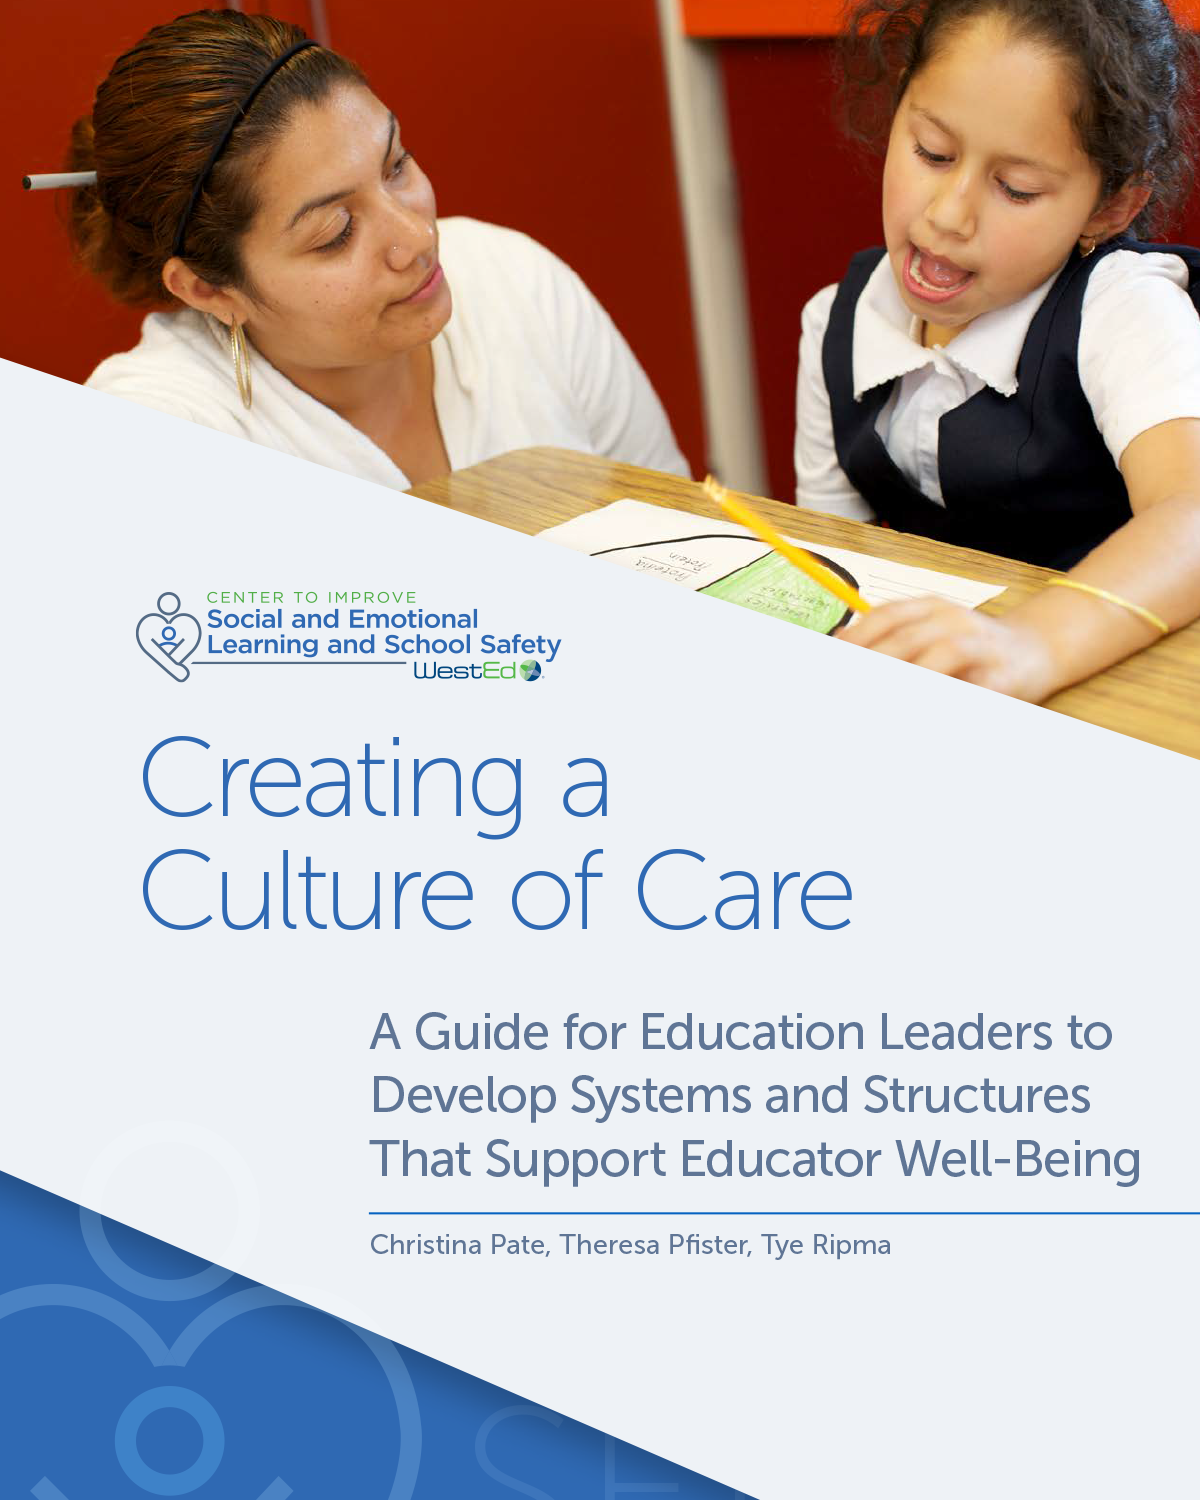 Creating a Culture of Care. A Guide for Education Leaders to Develop Systems and Structures That Support Educator Well-Being